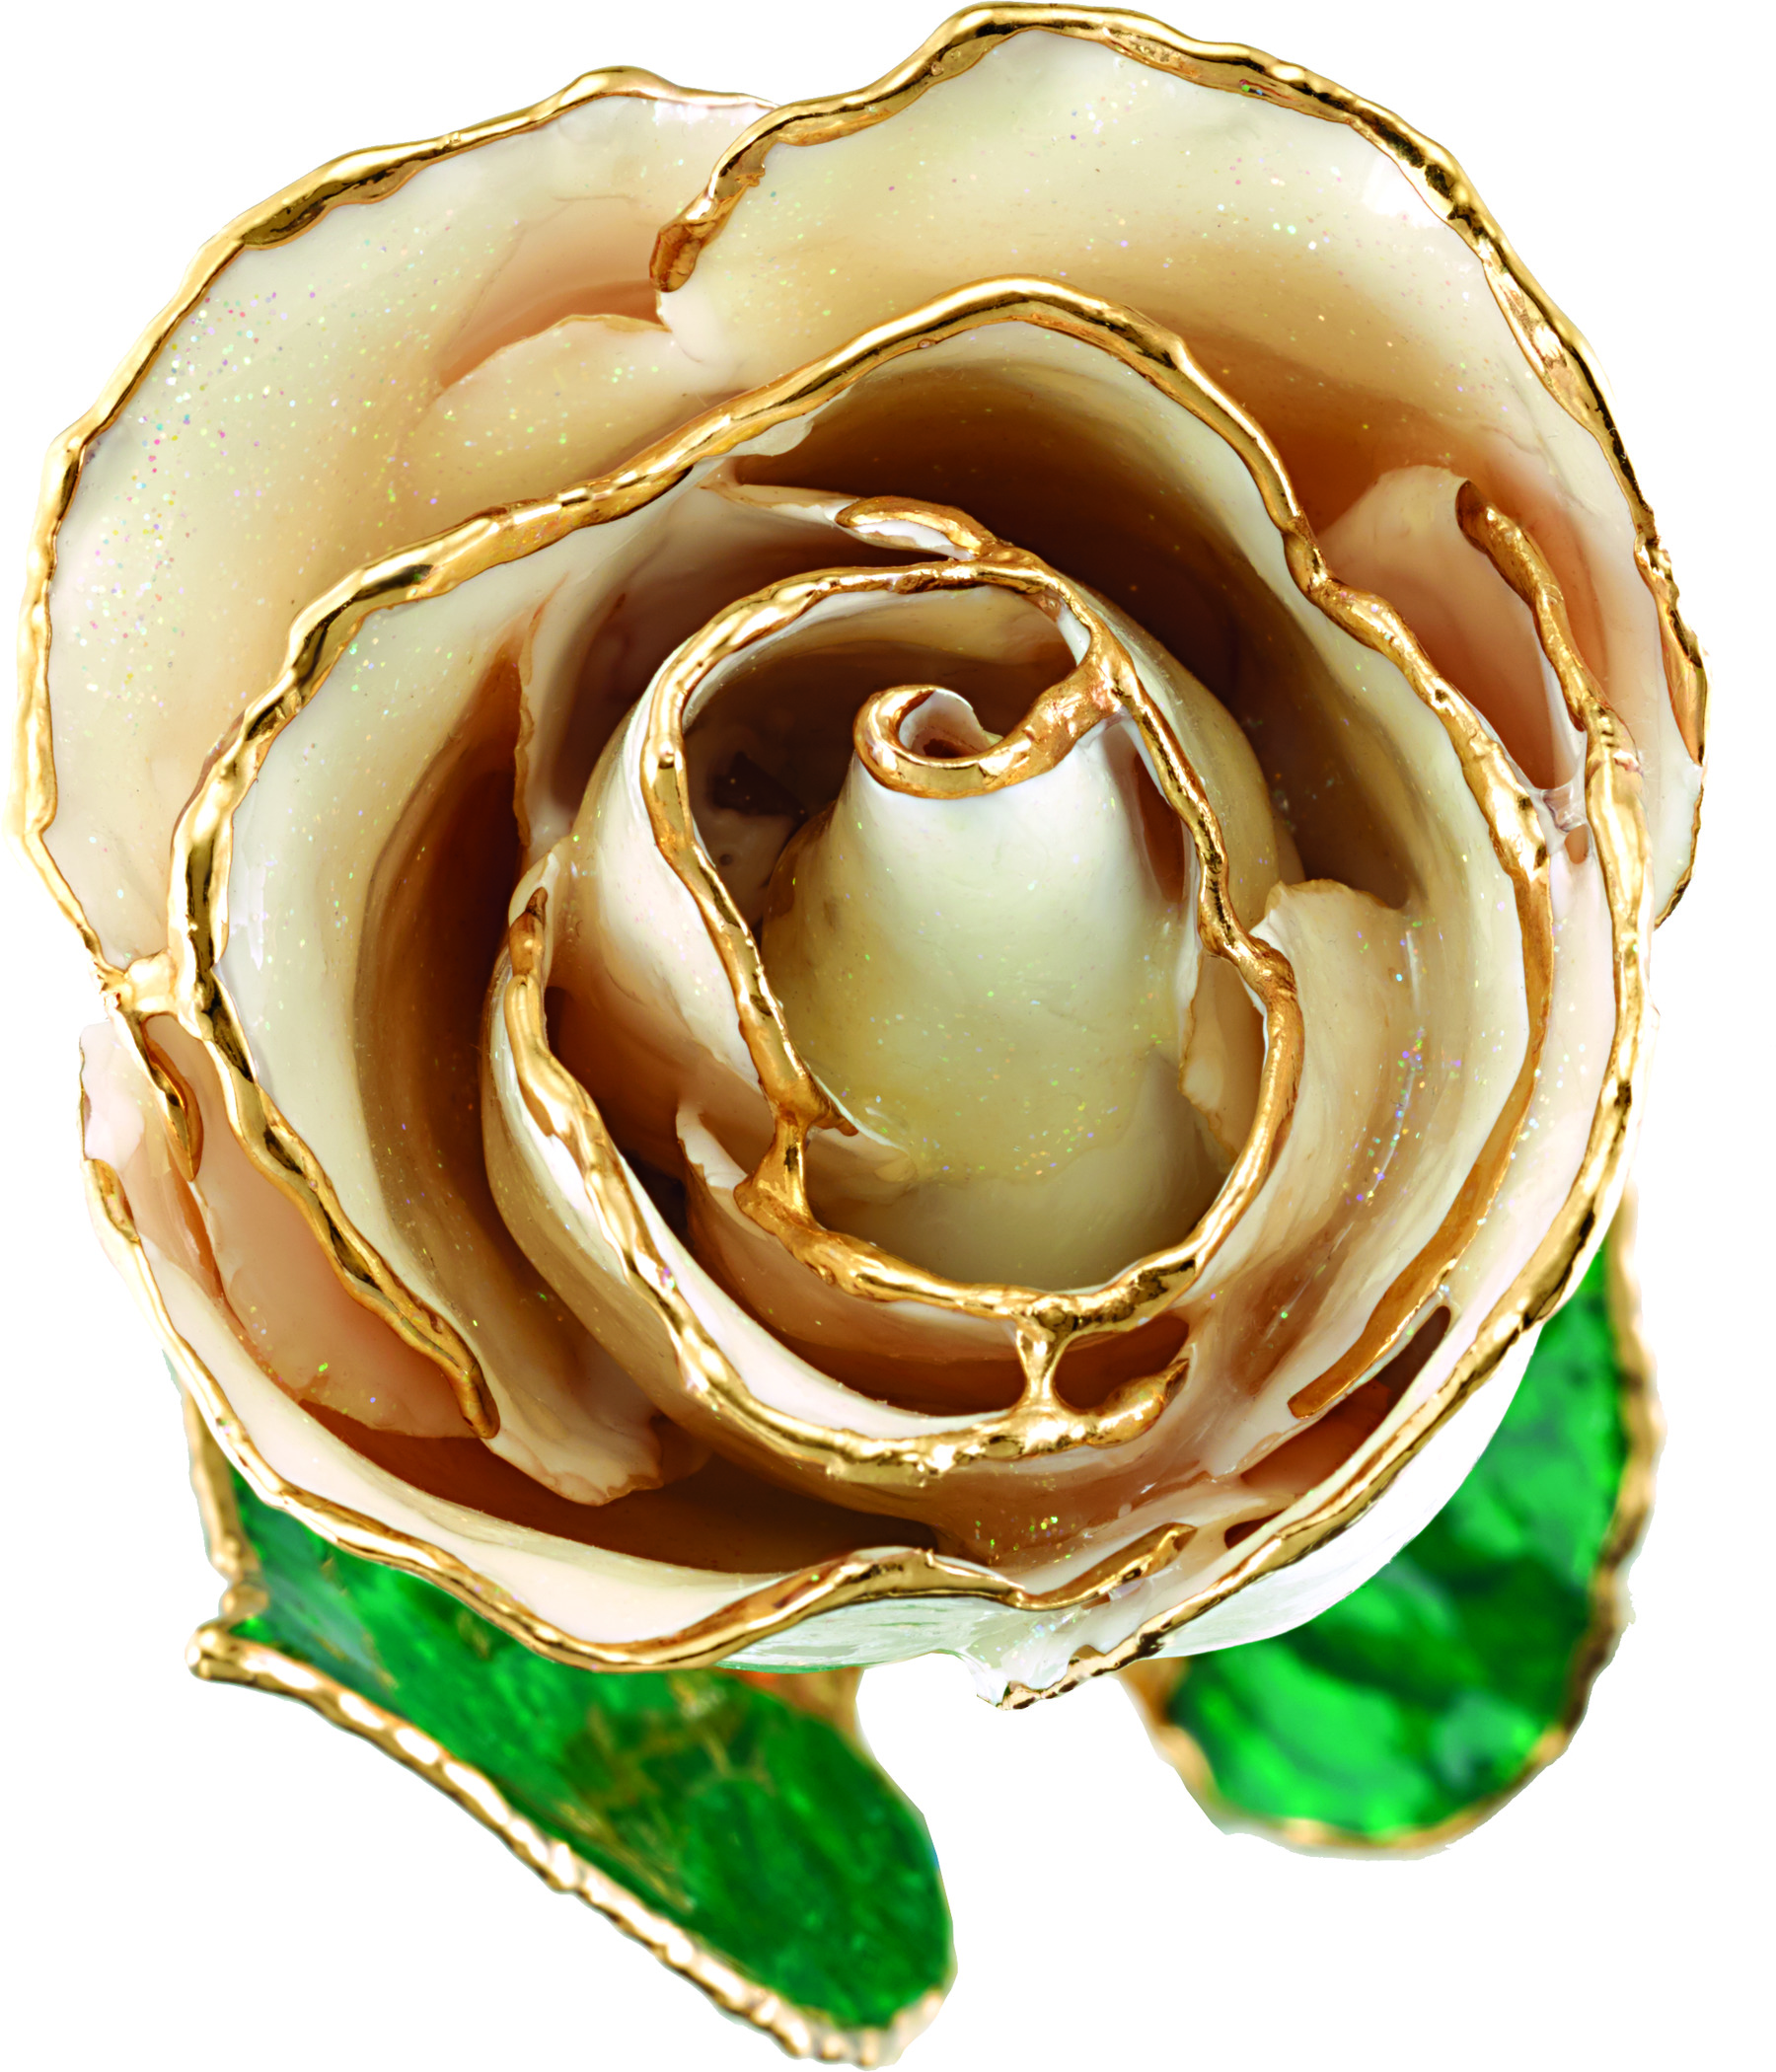 April Lacquered Sparkle White Diamond Colored Rose with Gold Trim 